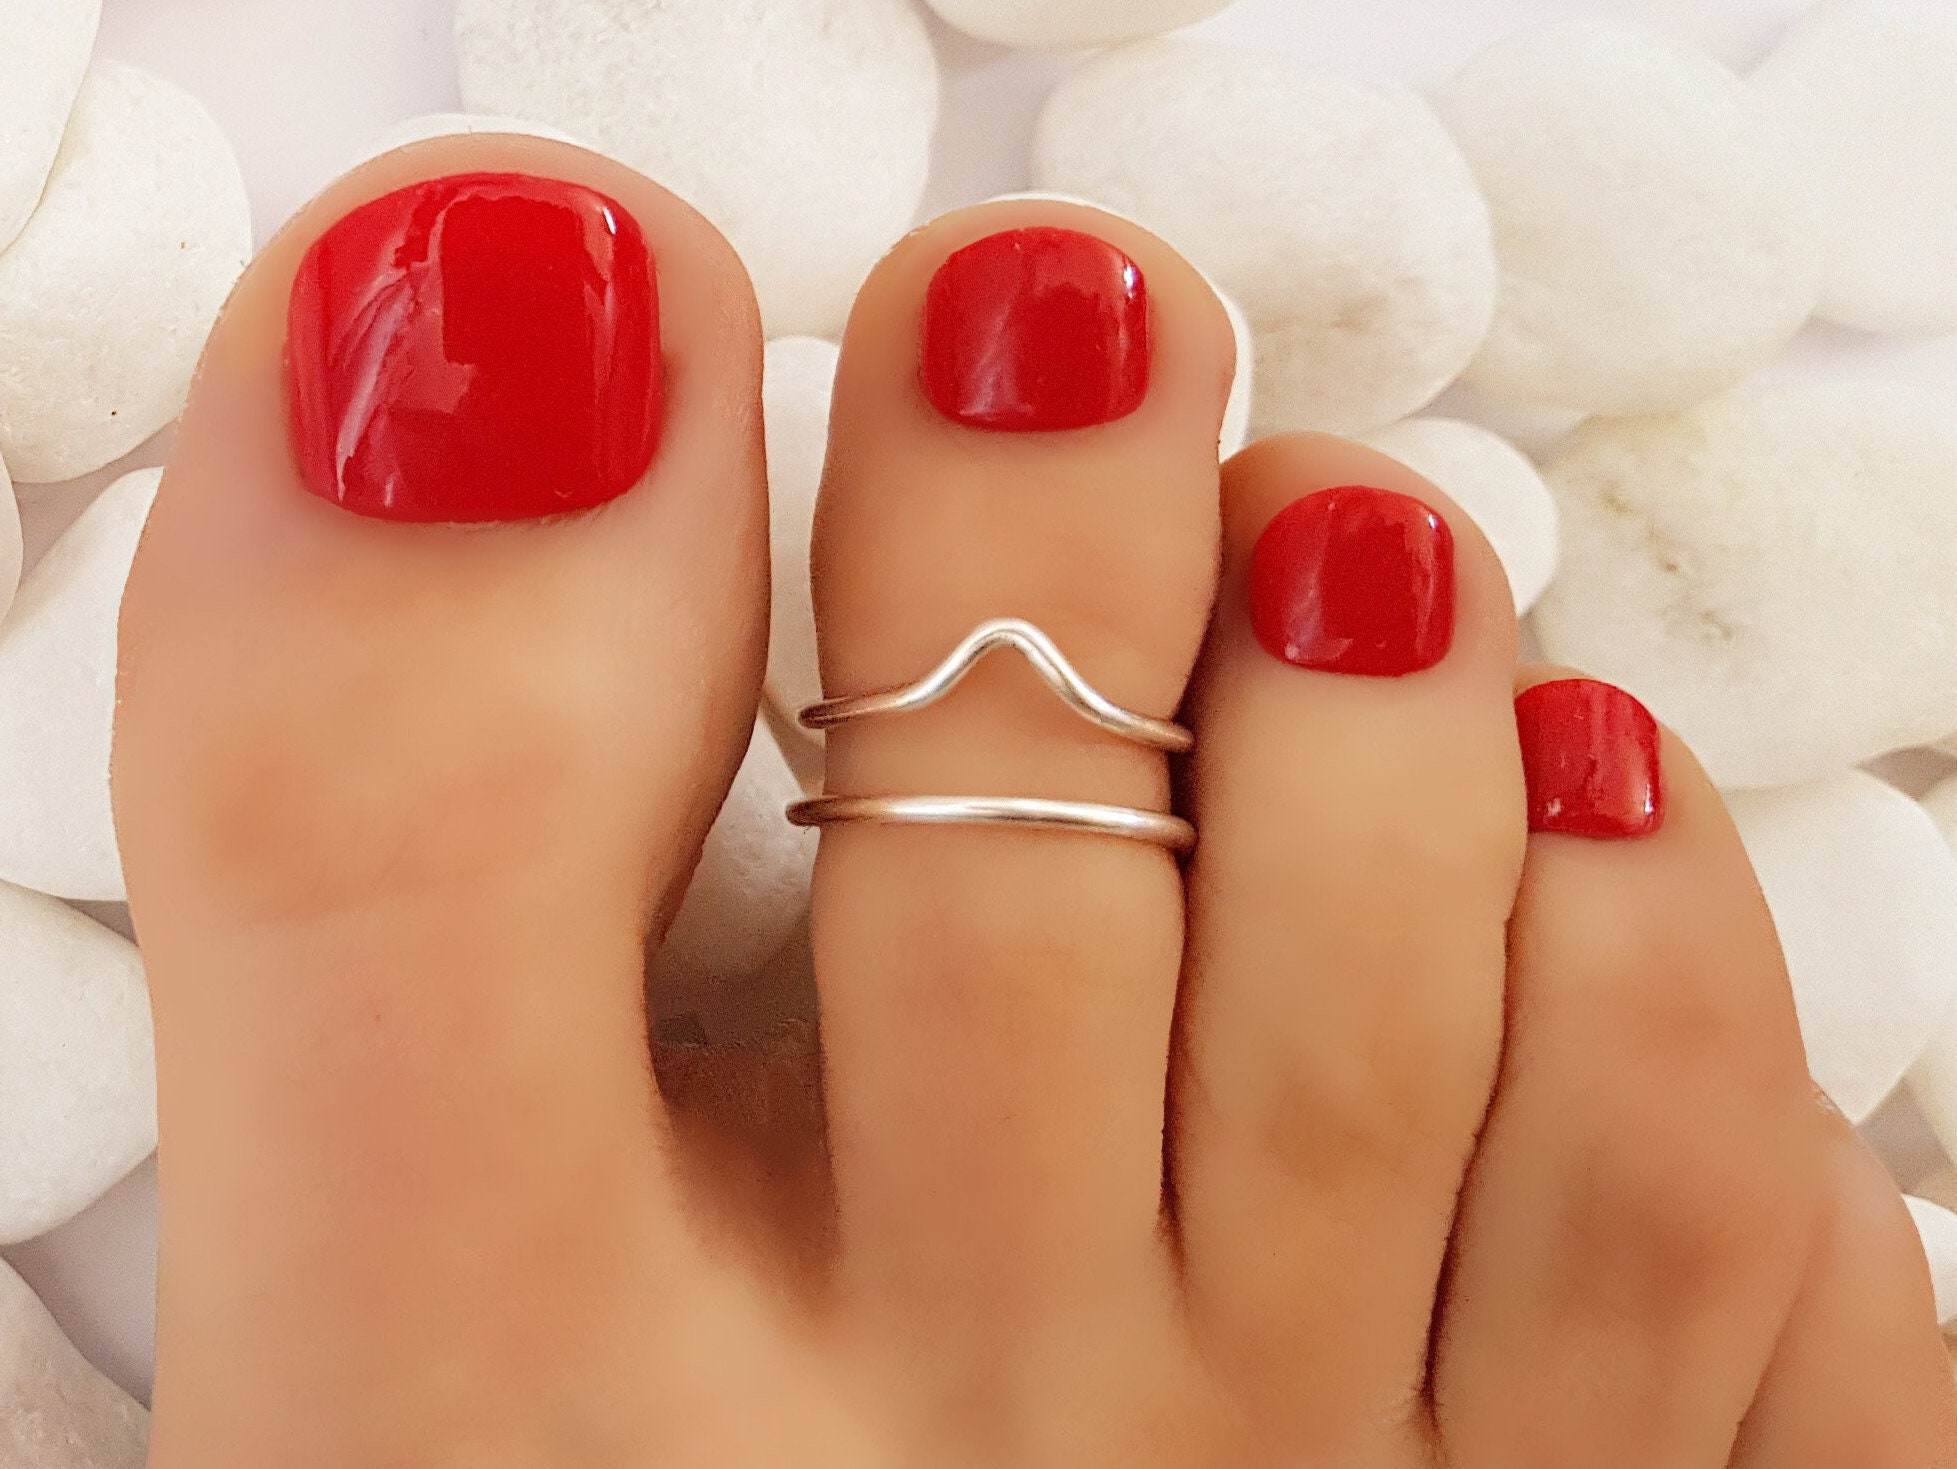 Toe Ring Foot Women Jewelry | Foot Ring Jewelry Vintage | Adjustable Toe  Ring Set - Hot - Aliexpress